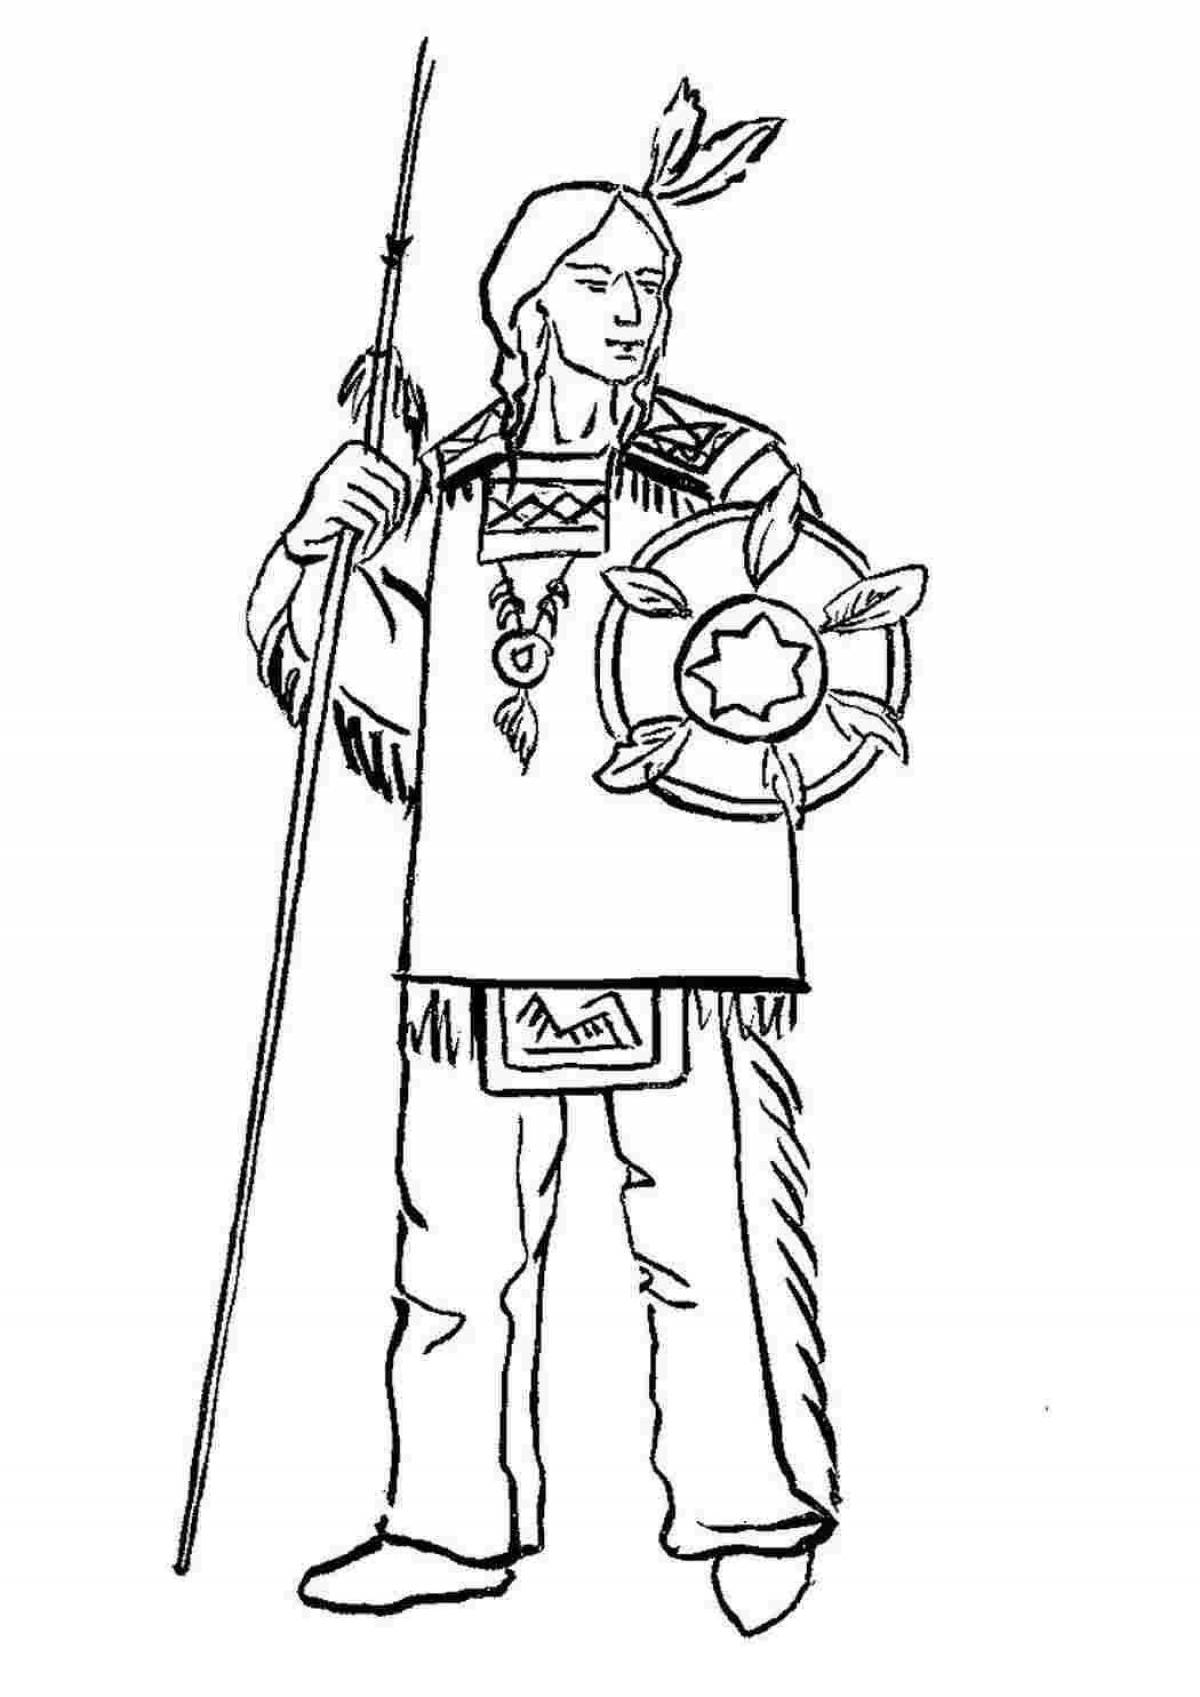 Glorious indians coloring page